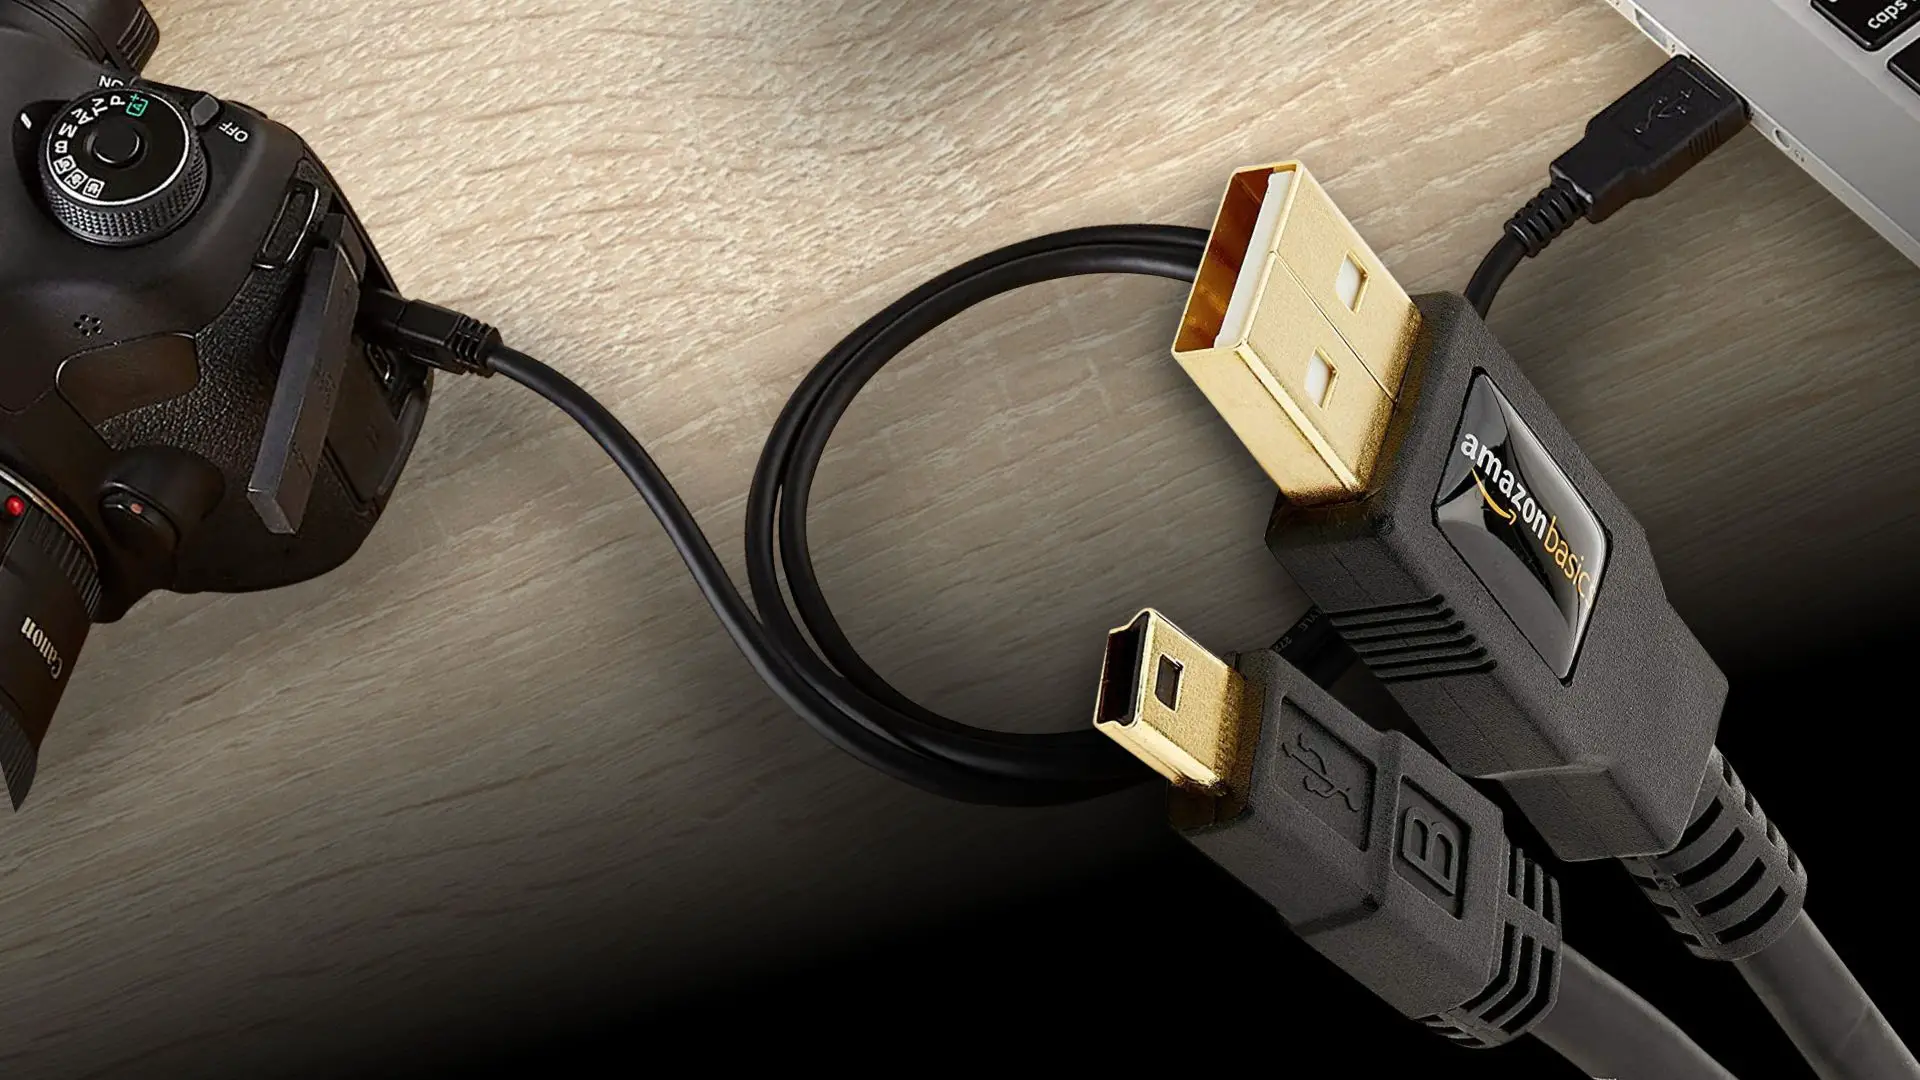 Basic USB Type A Male to Mini USB Male Cable